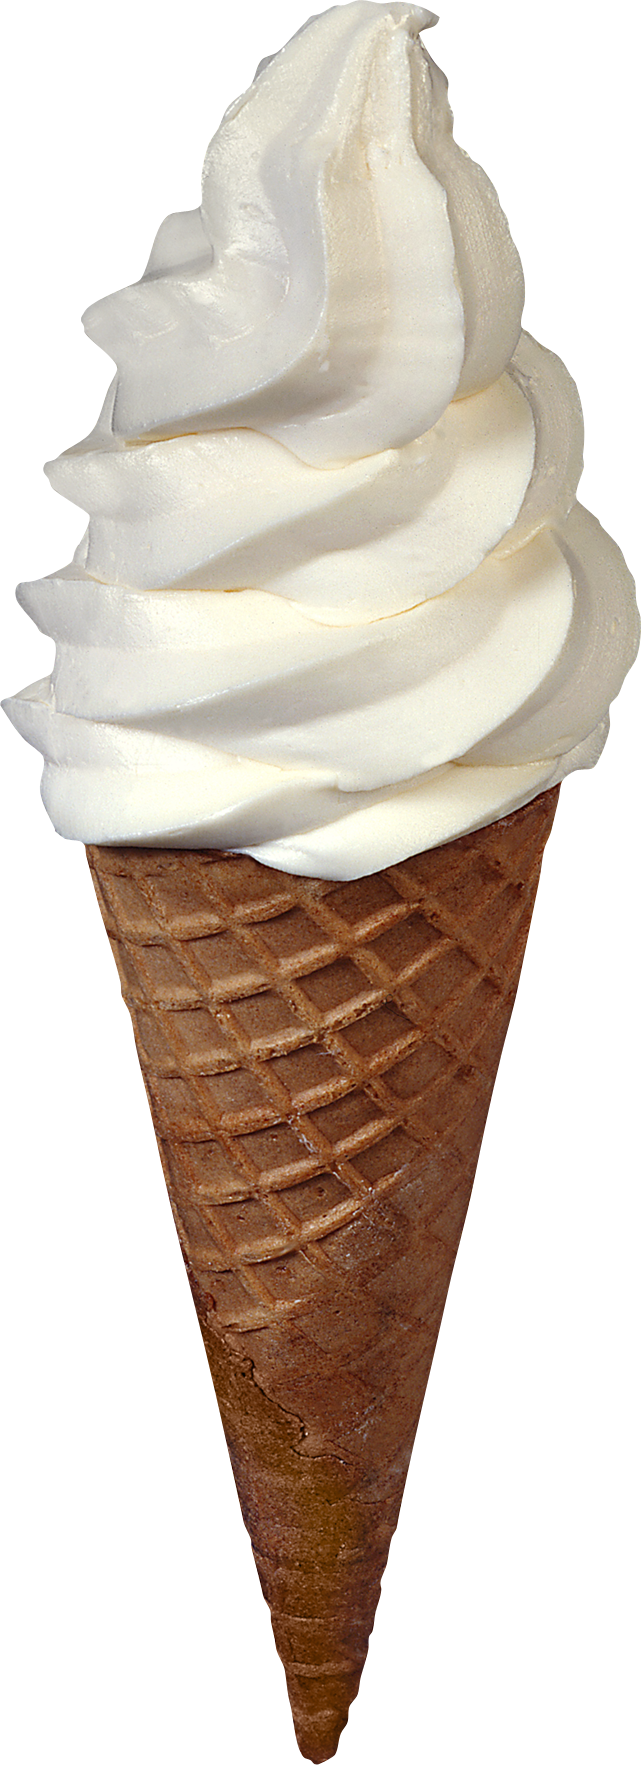 Ice Cream Png Image Transparent Image Download Size X Px